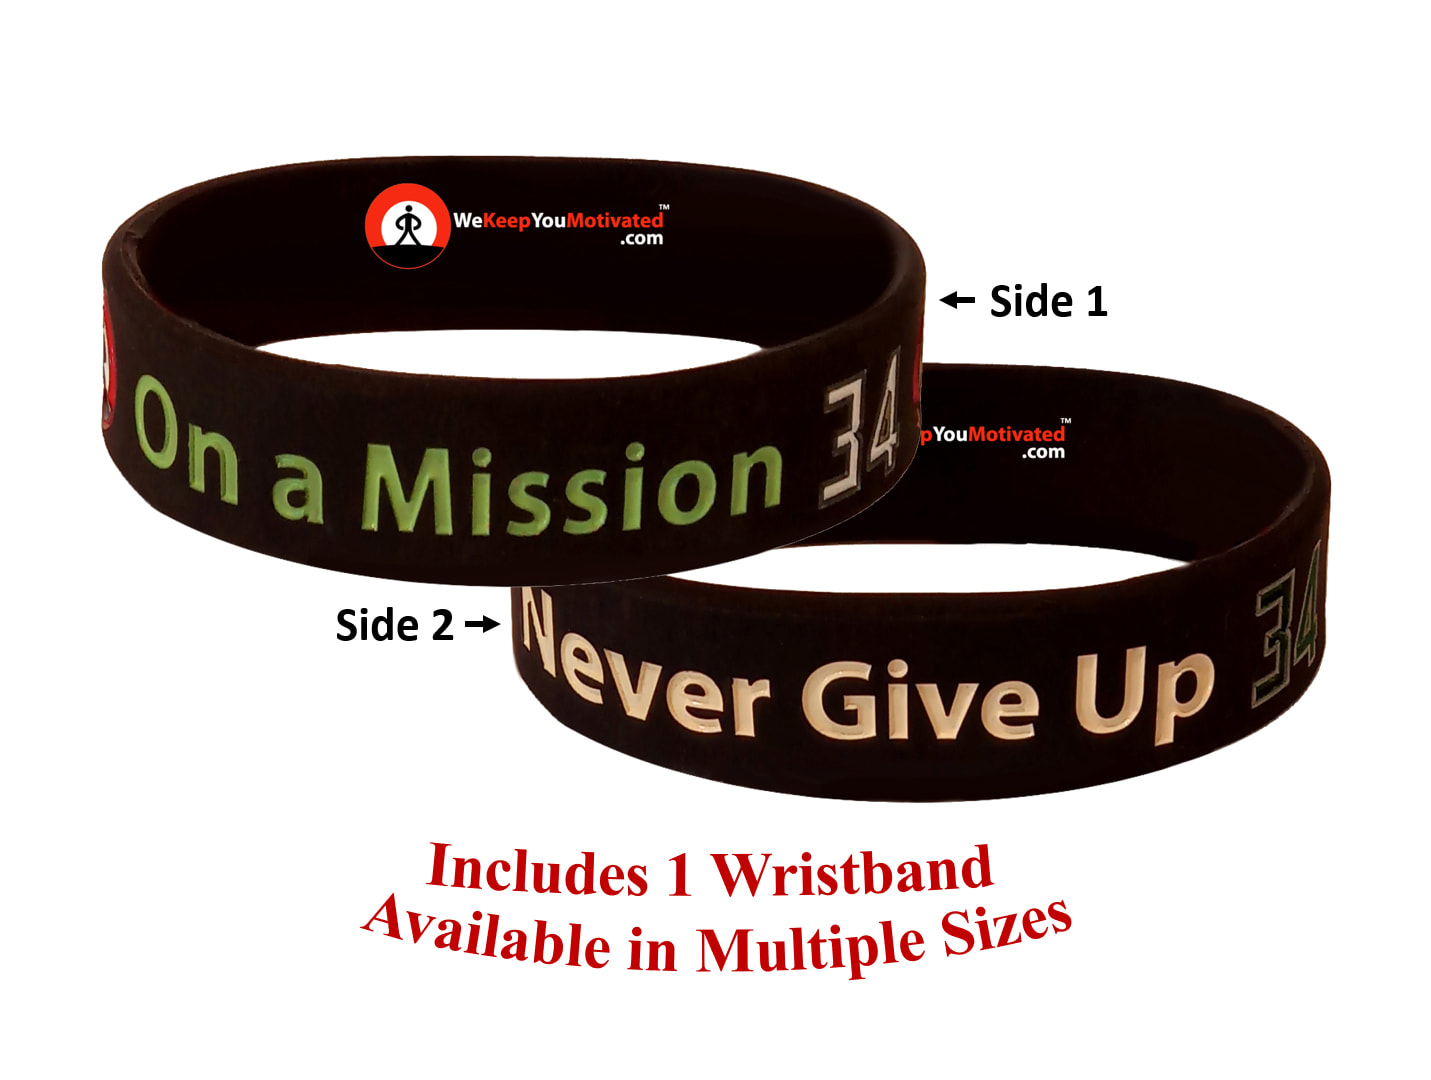 Giannis Antetokounmpo Never Give Up On a Mission Wristband1431 x 1080